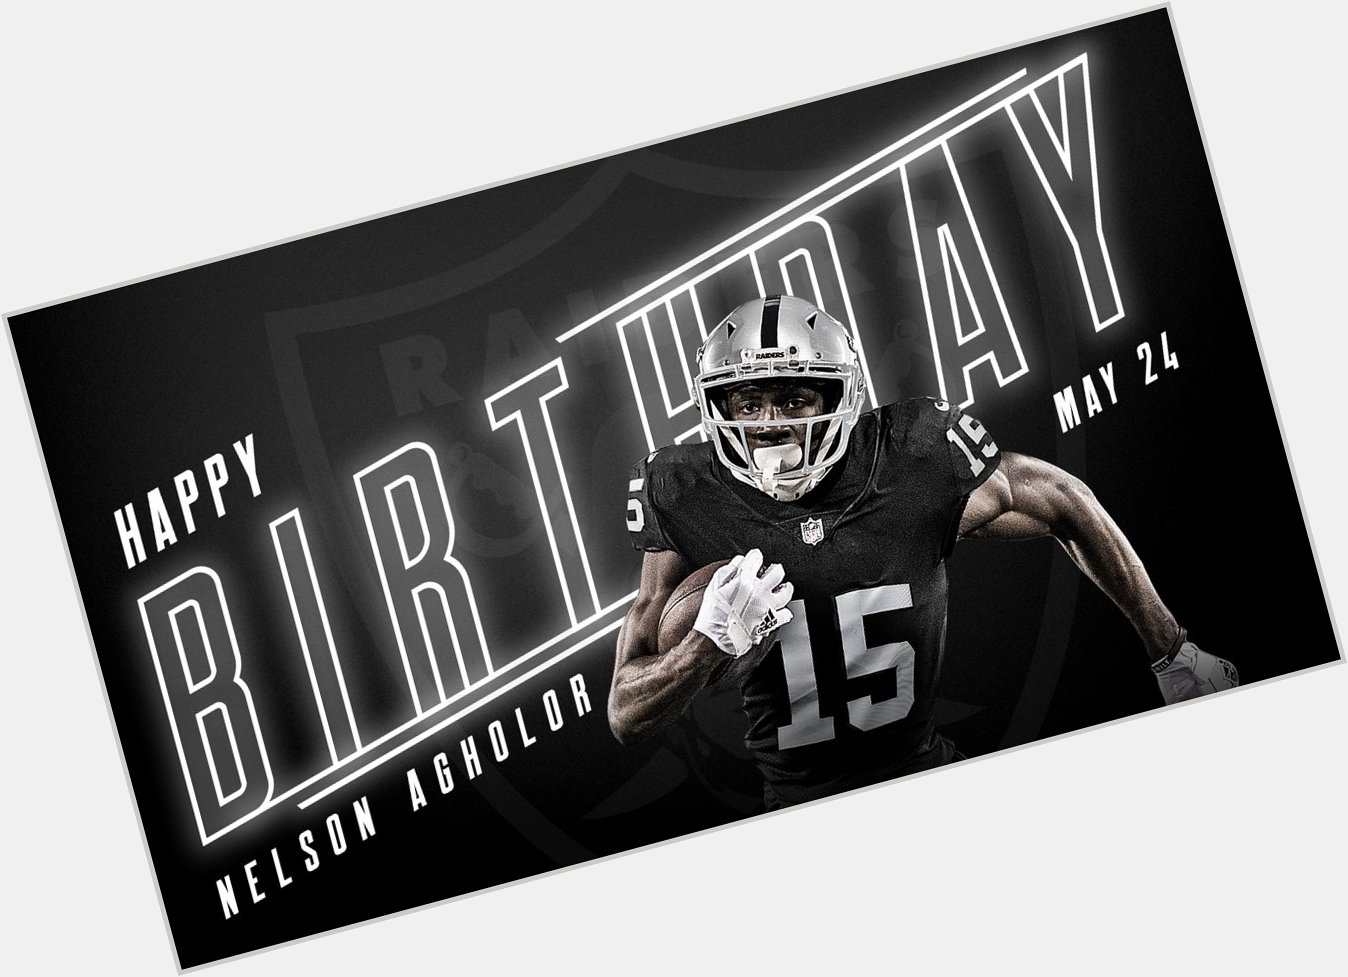 Happy birthday Nelson Agholor 